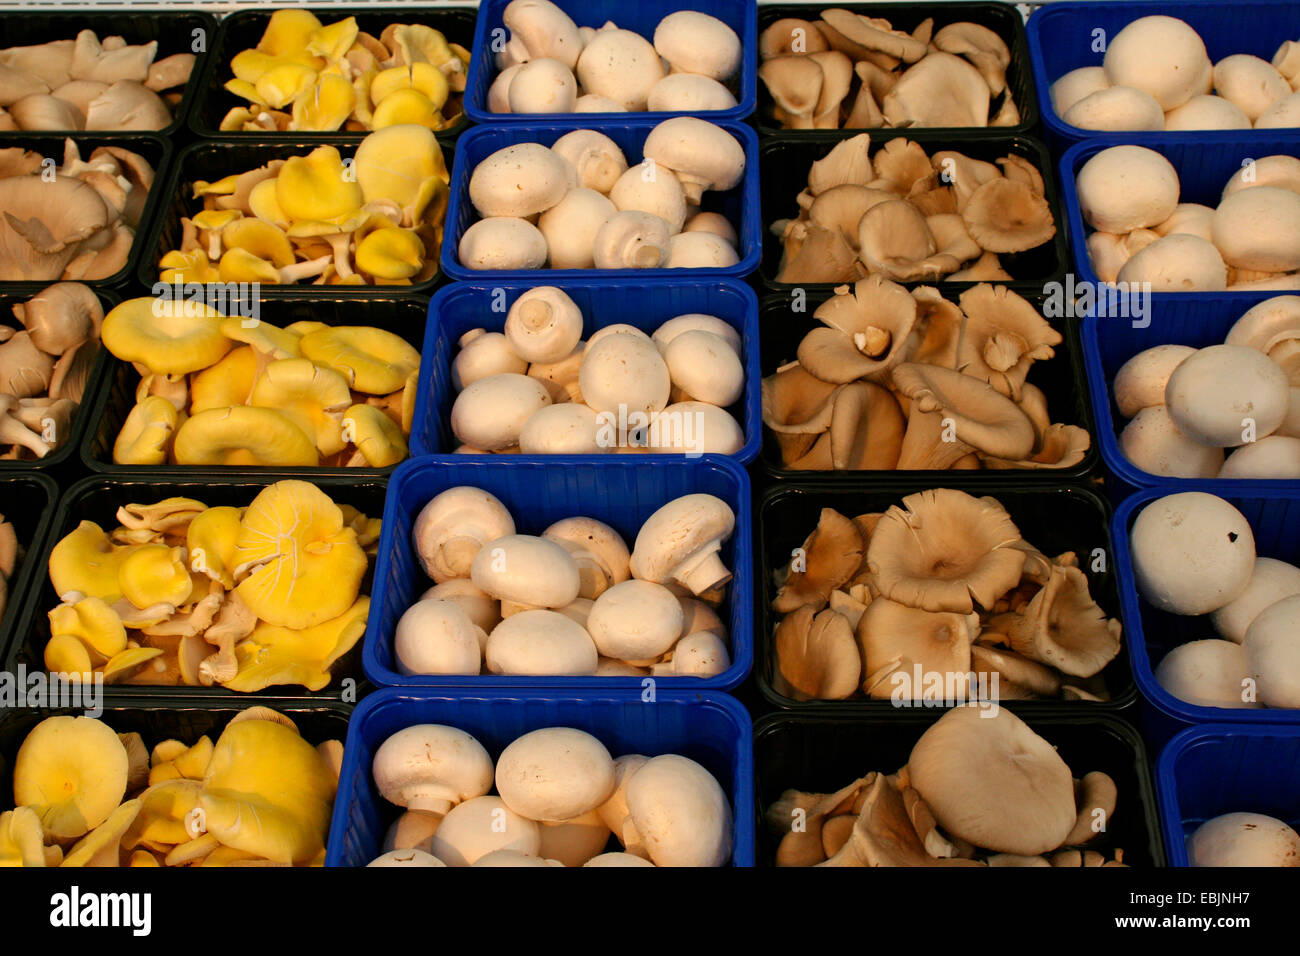 different breeded edible mushrooms for sale, Germany Stock Photo